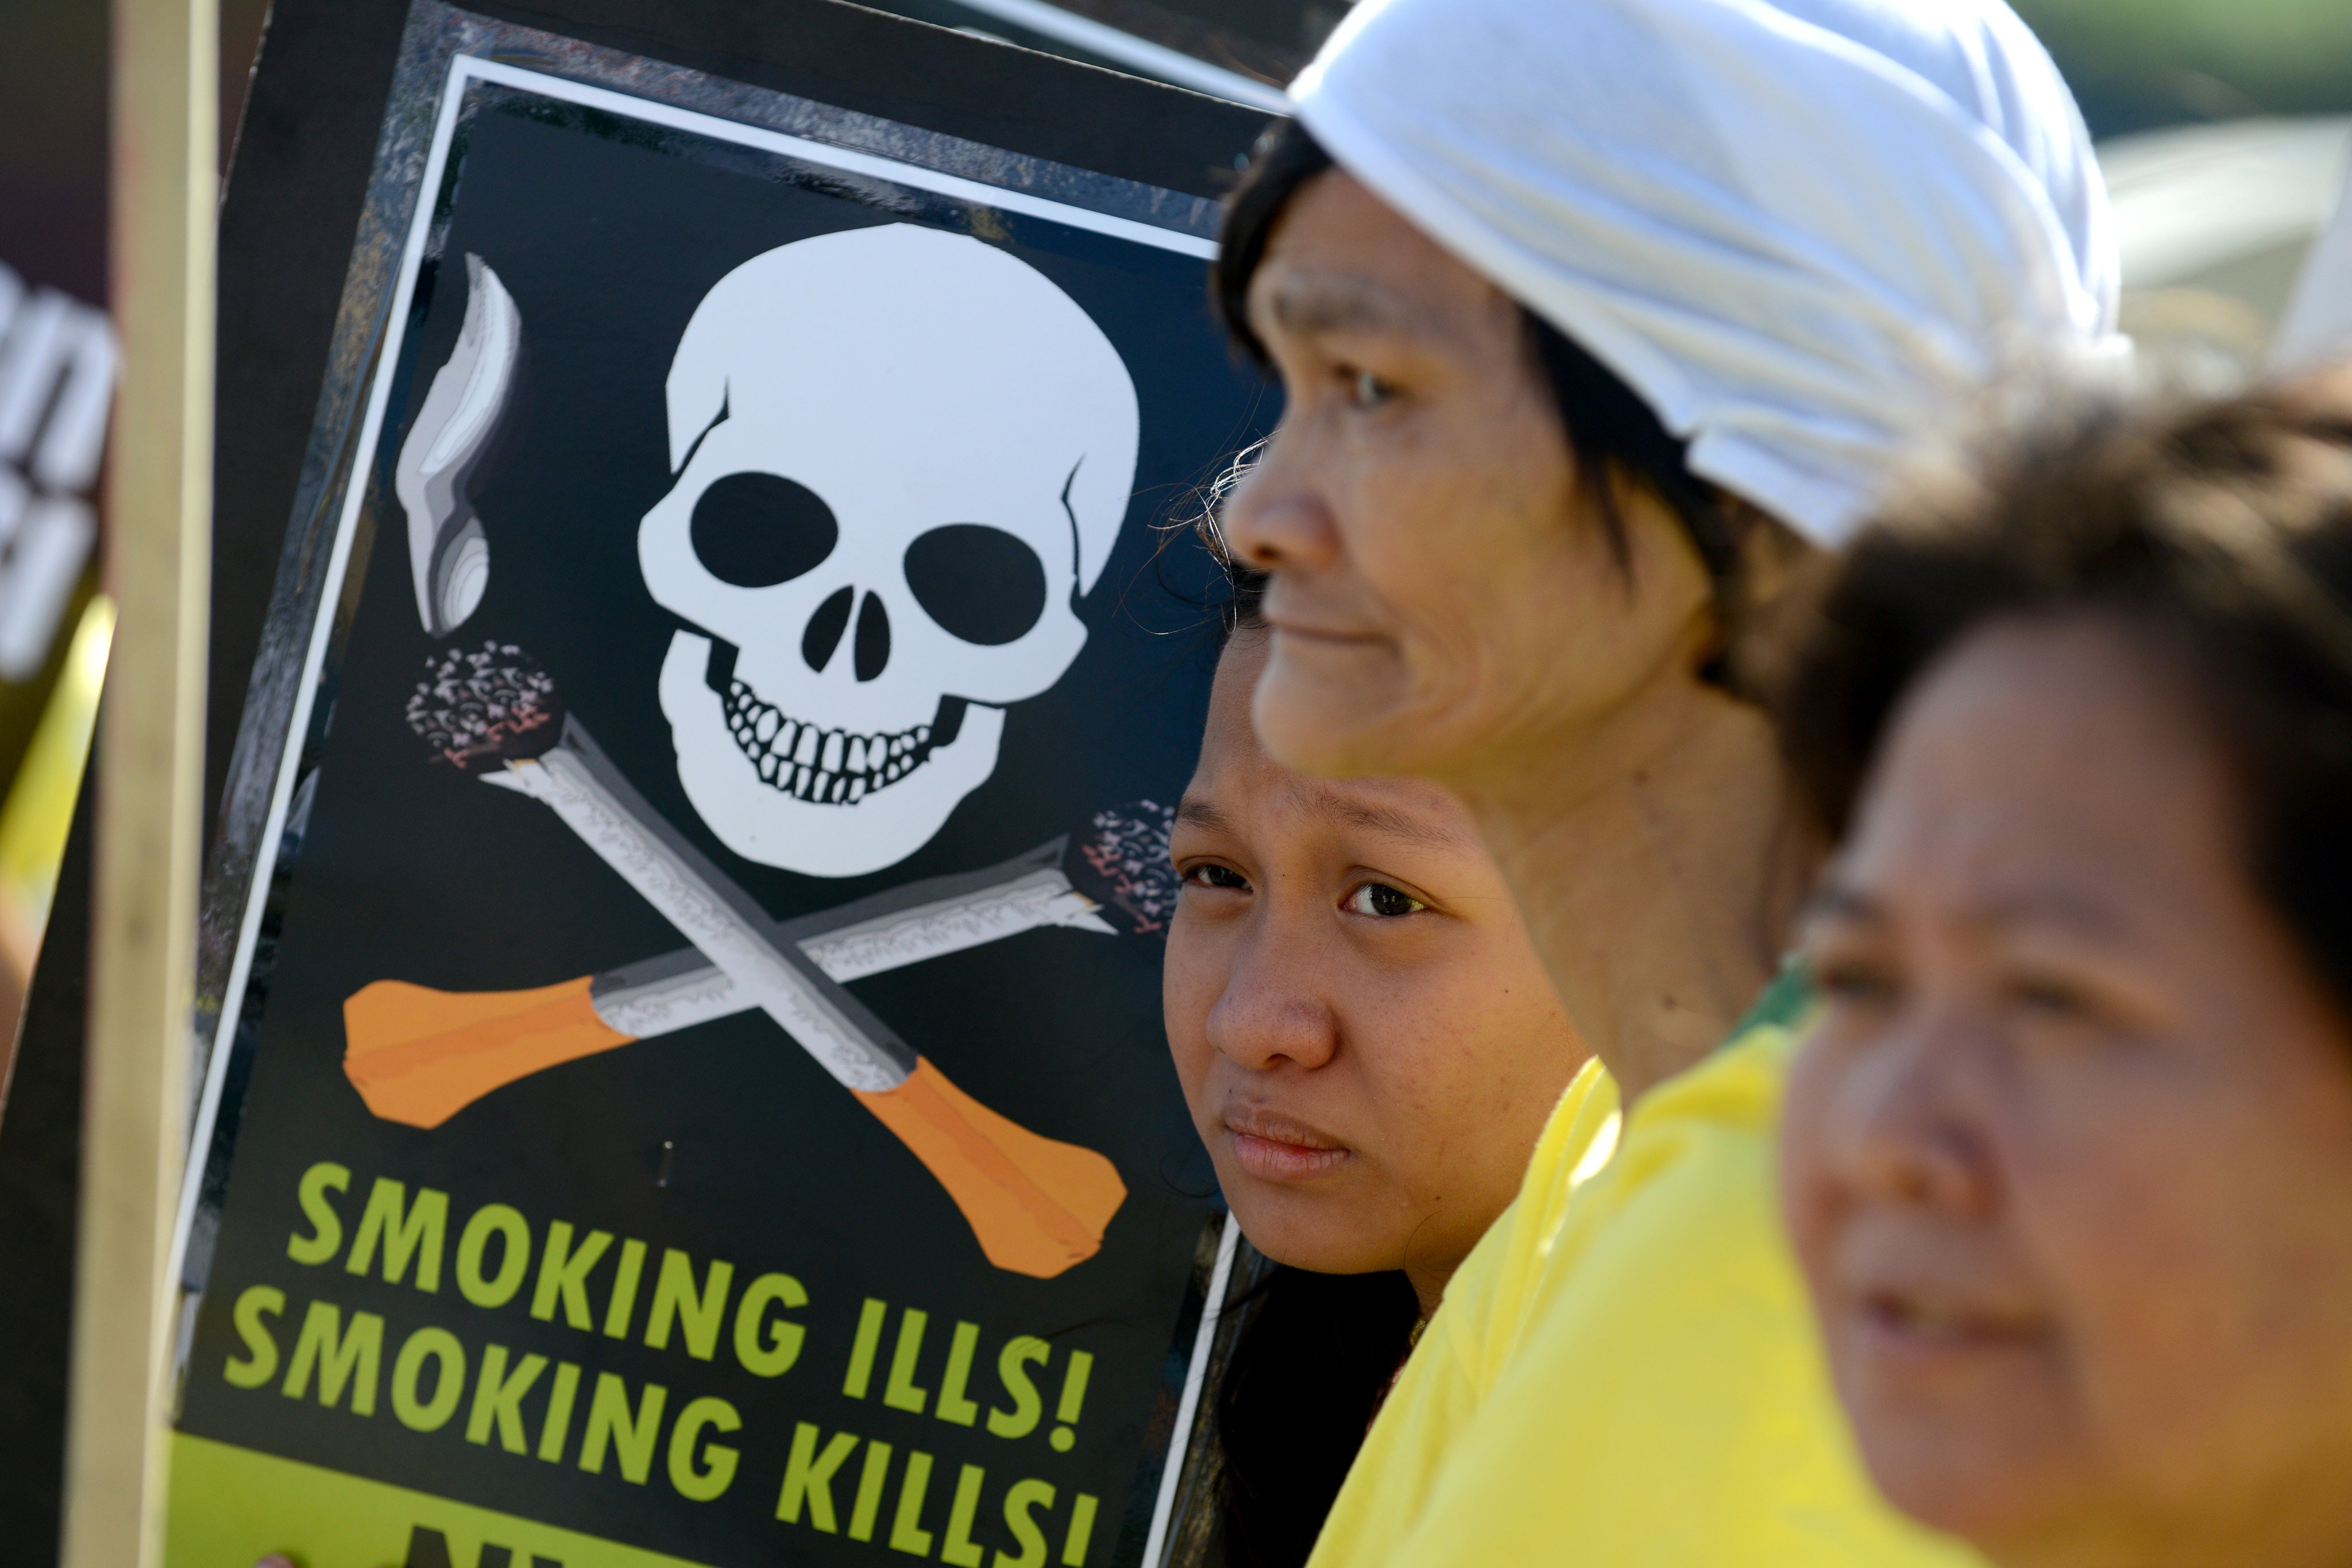 Anti-smoking protesters gather in Manila on March 20, 2013. Photo: AFP